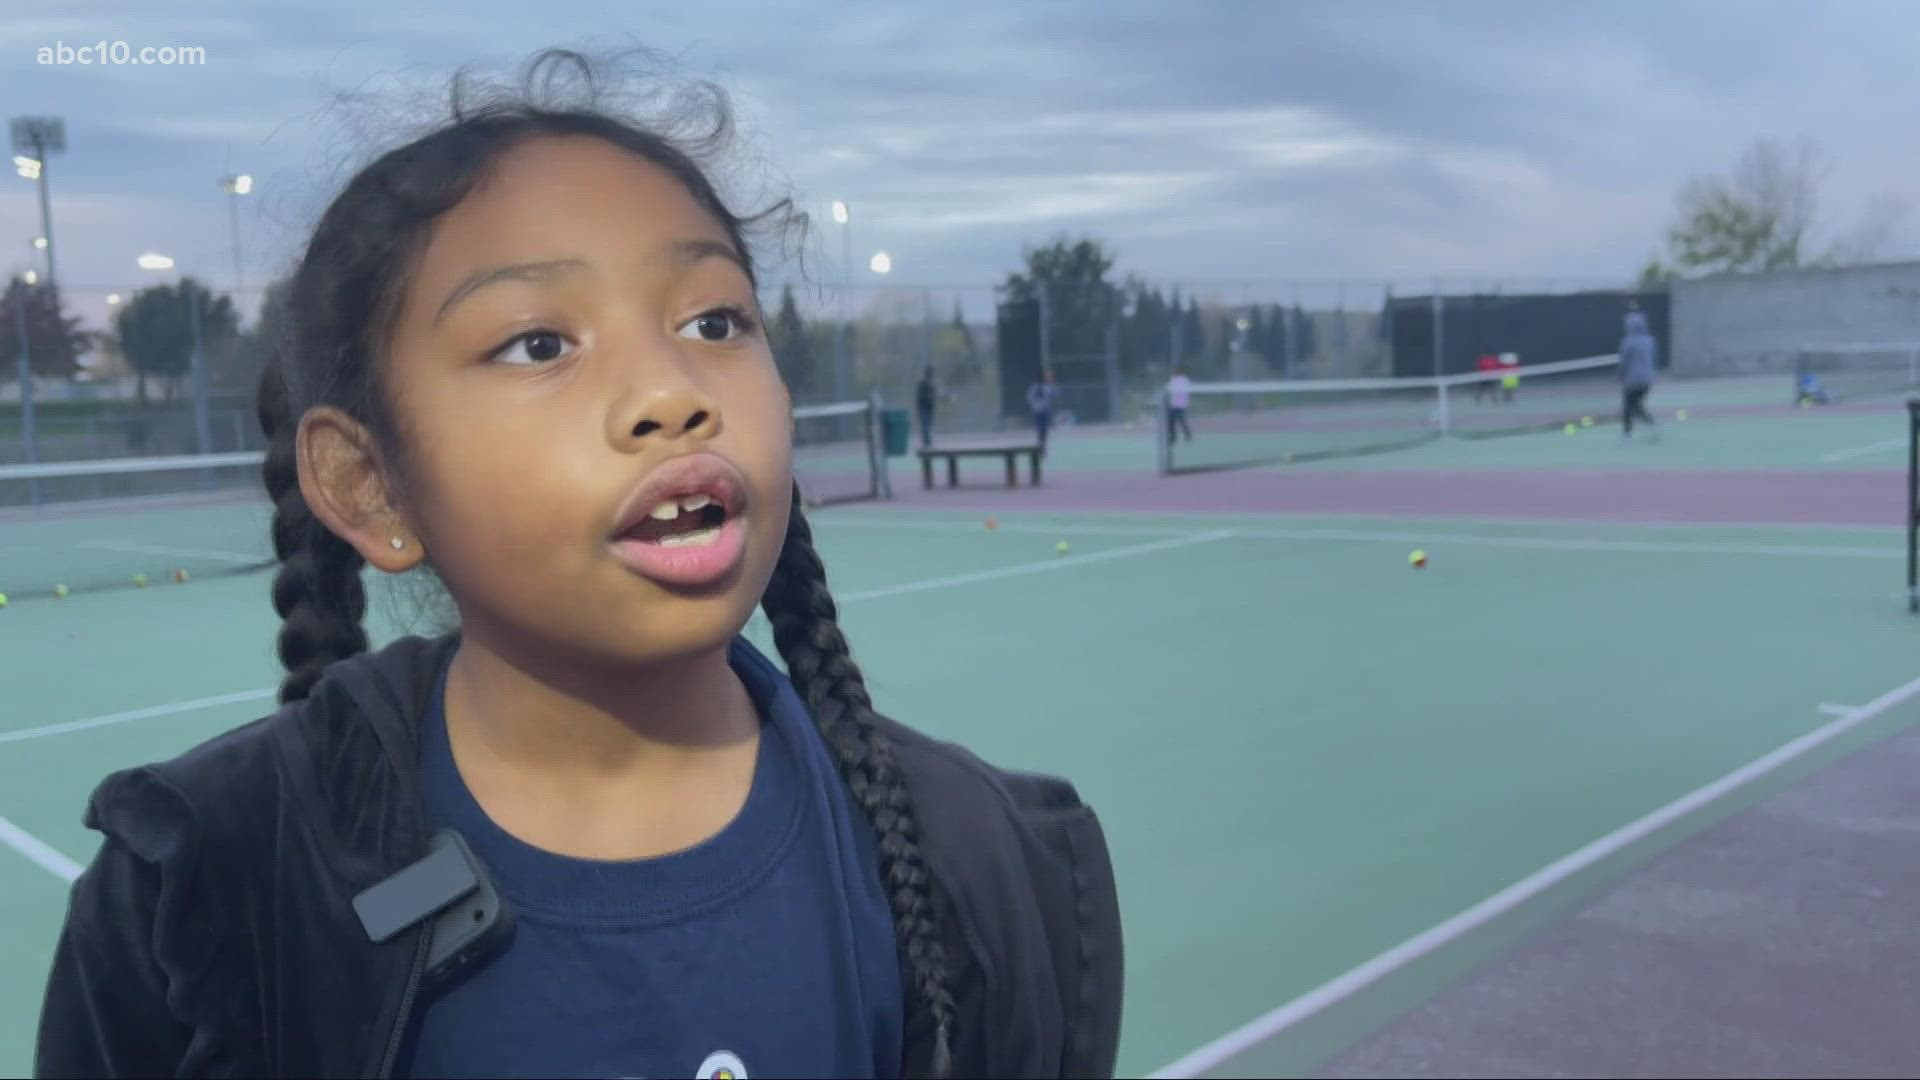 With the upcoming release of the Williams family biographical drama 'King Richard', our Mark S. Allen spoke with up and coming tennis players about Serena and Venus.